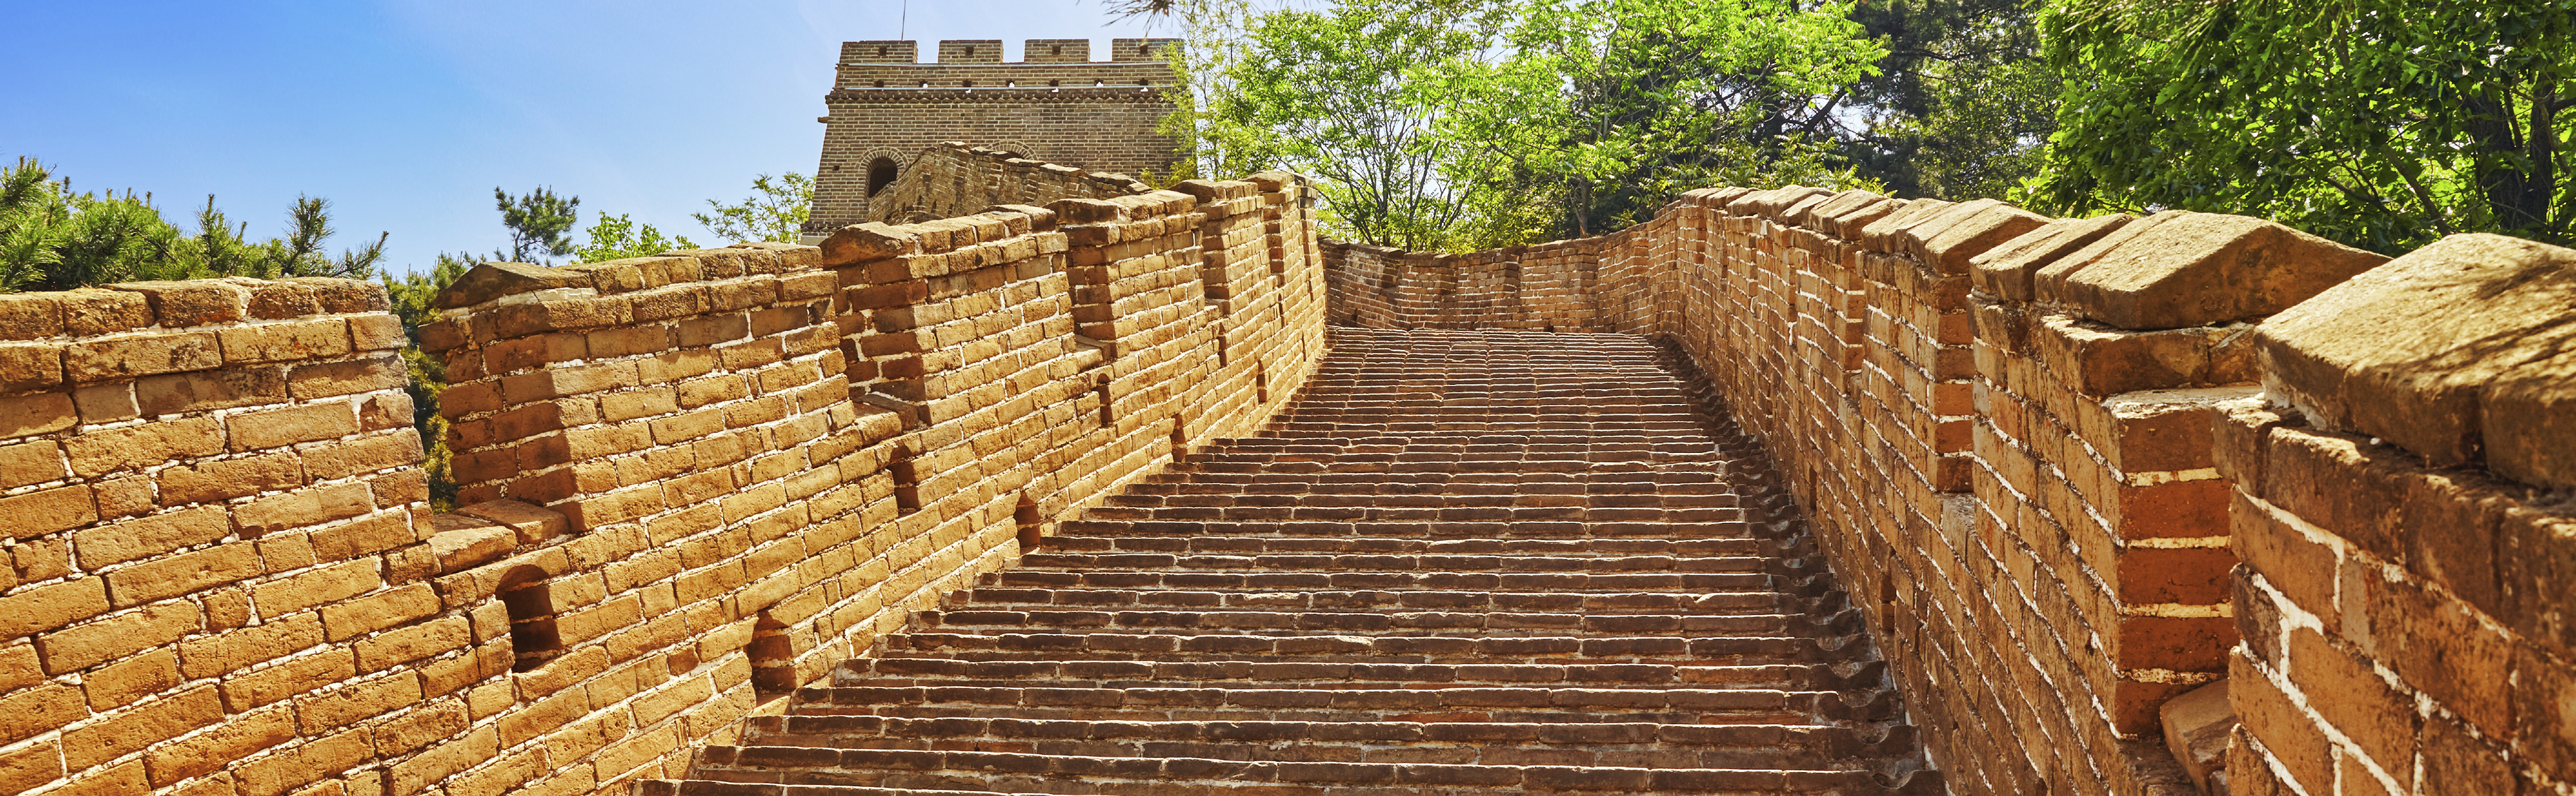 Stone staircase of Great Wall of China, section "Mitianyu".